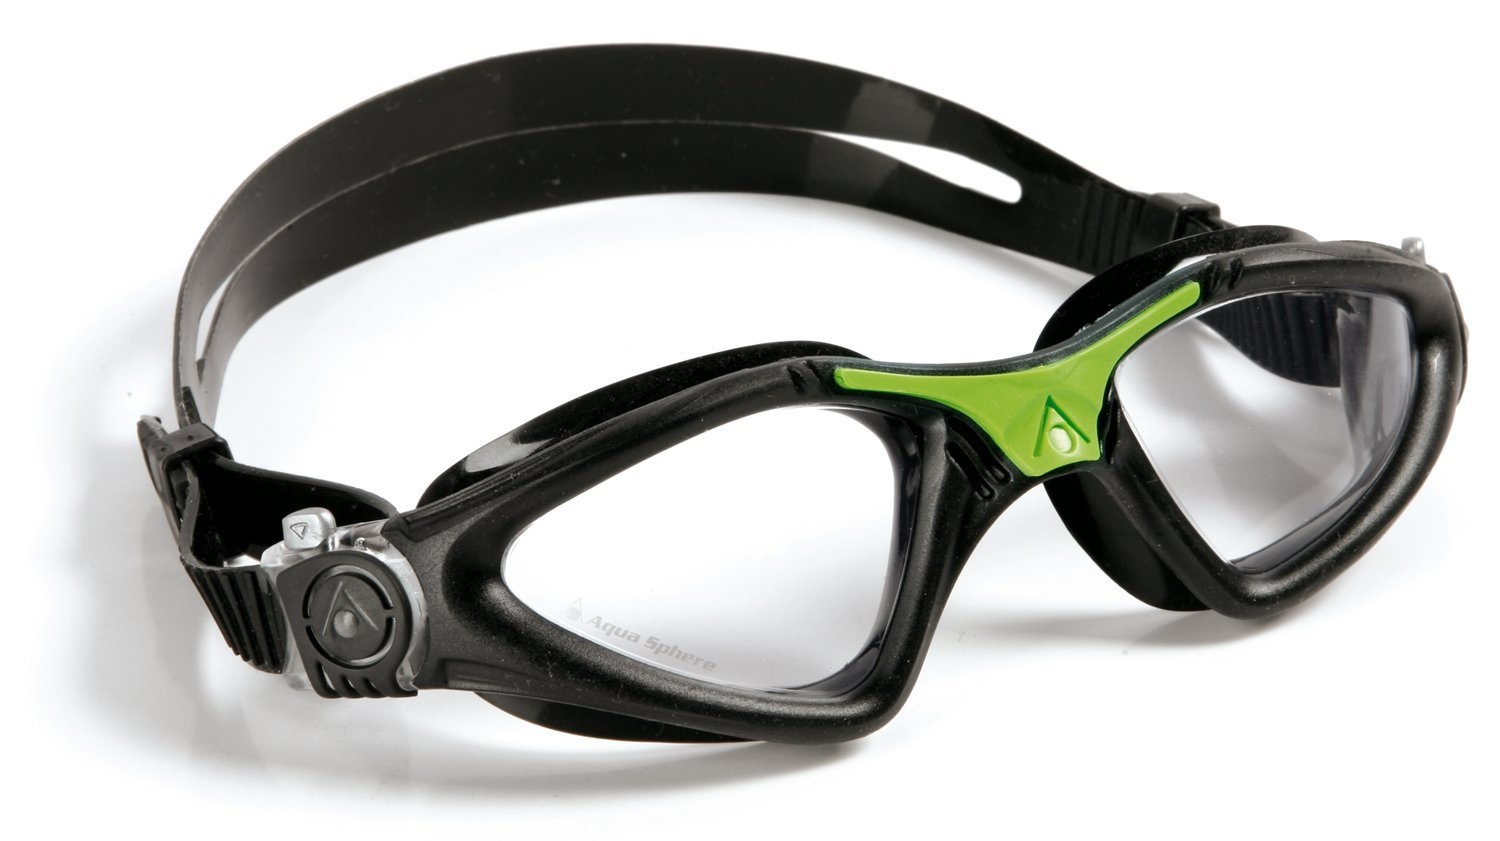 New Competition and Swim Team Goggles Introduced